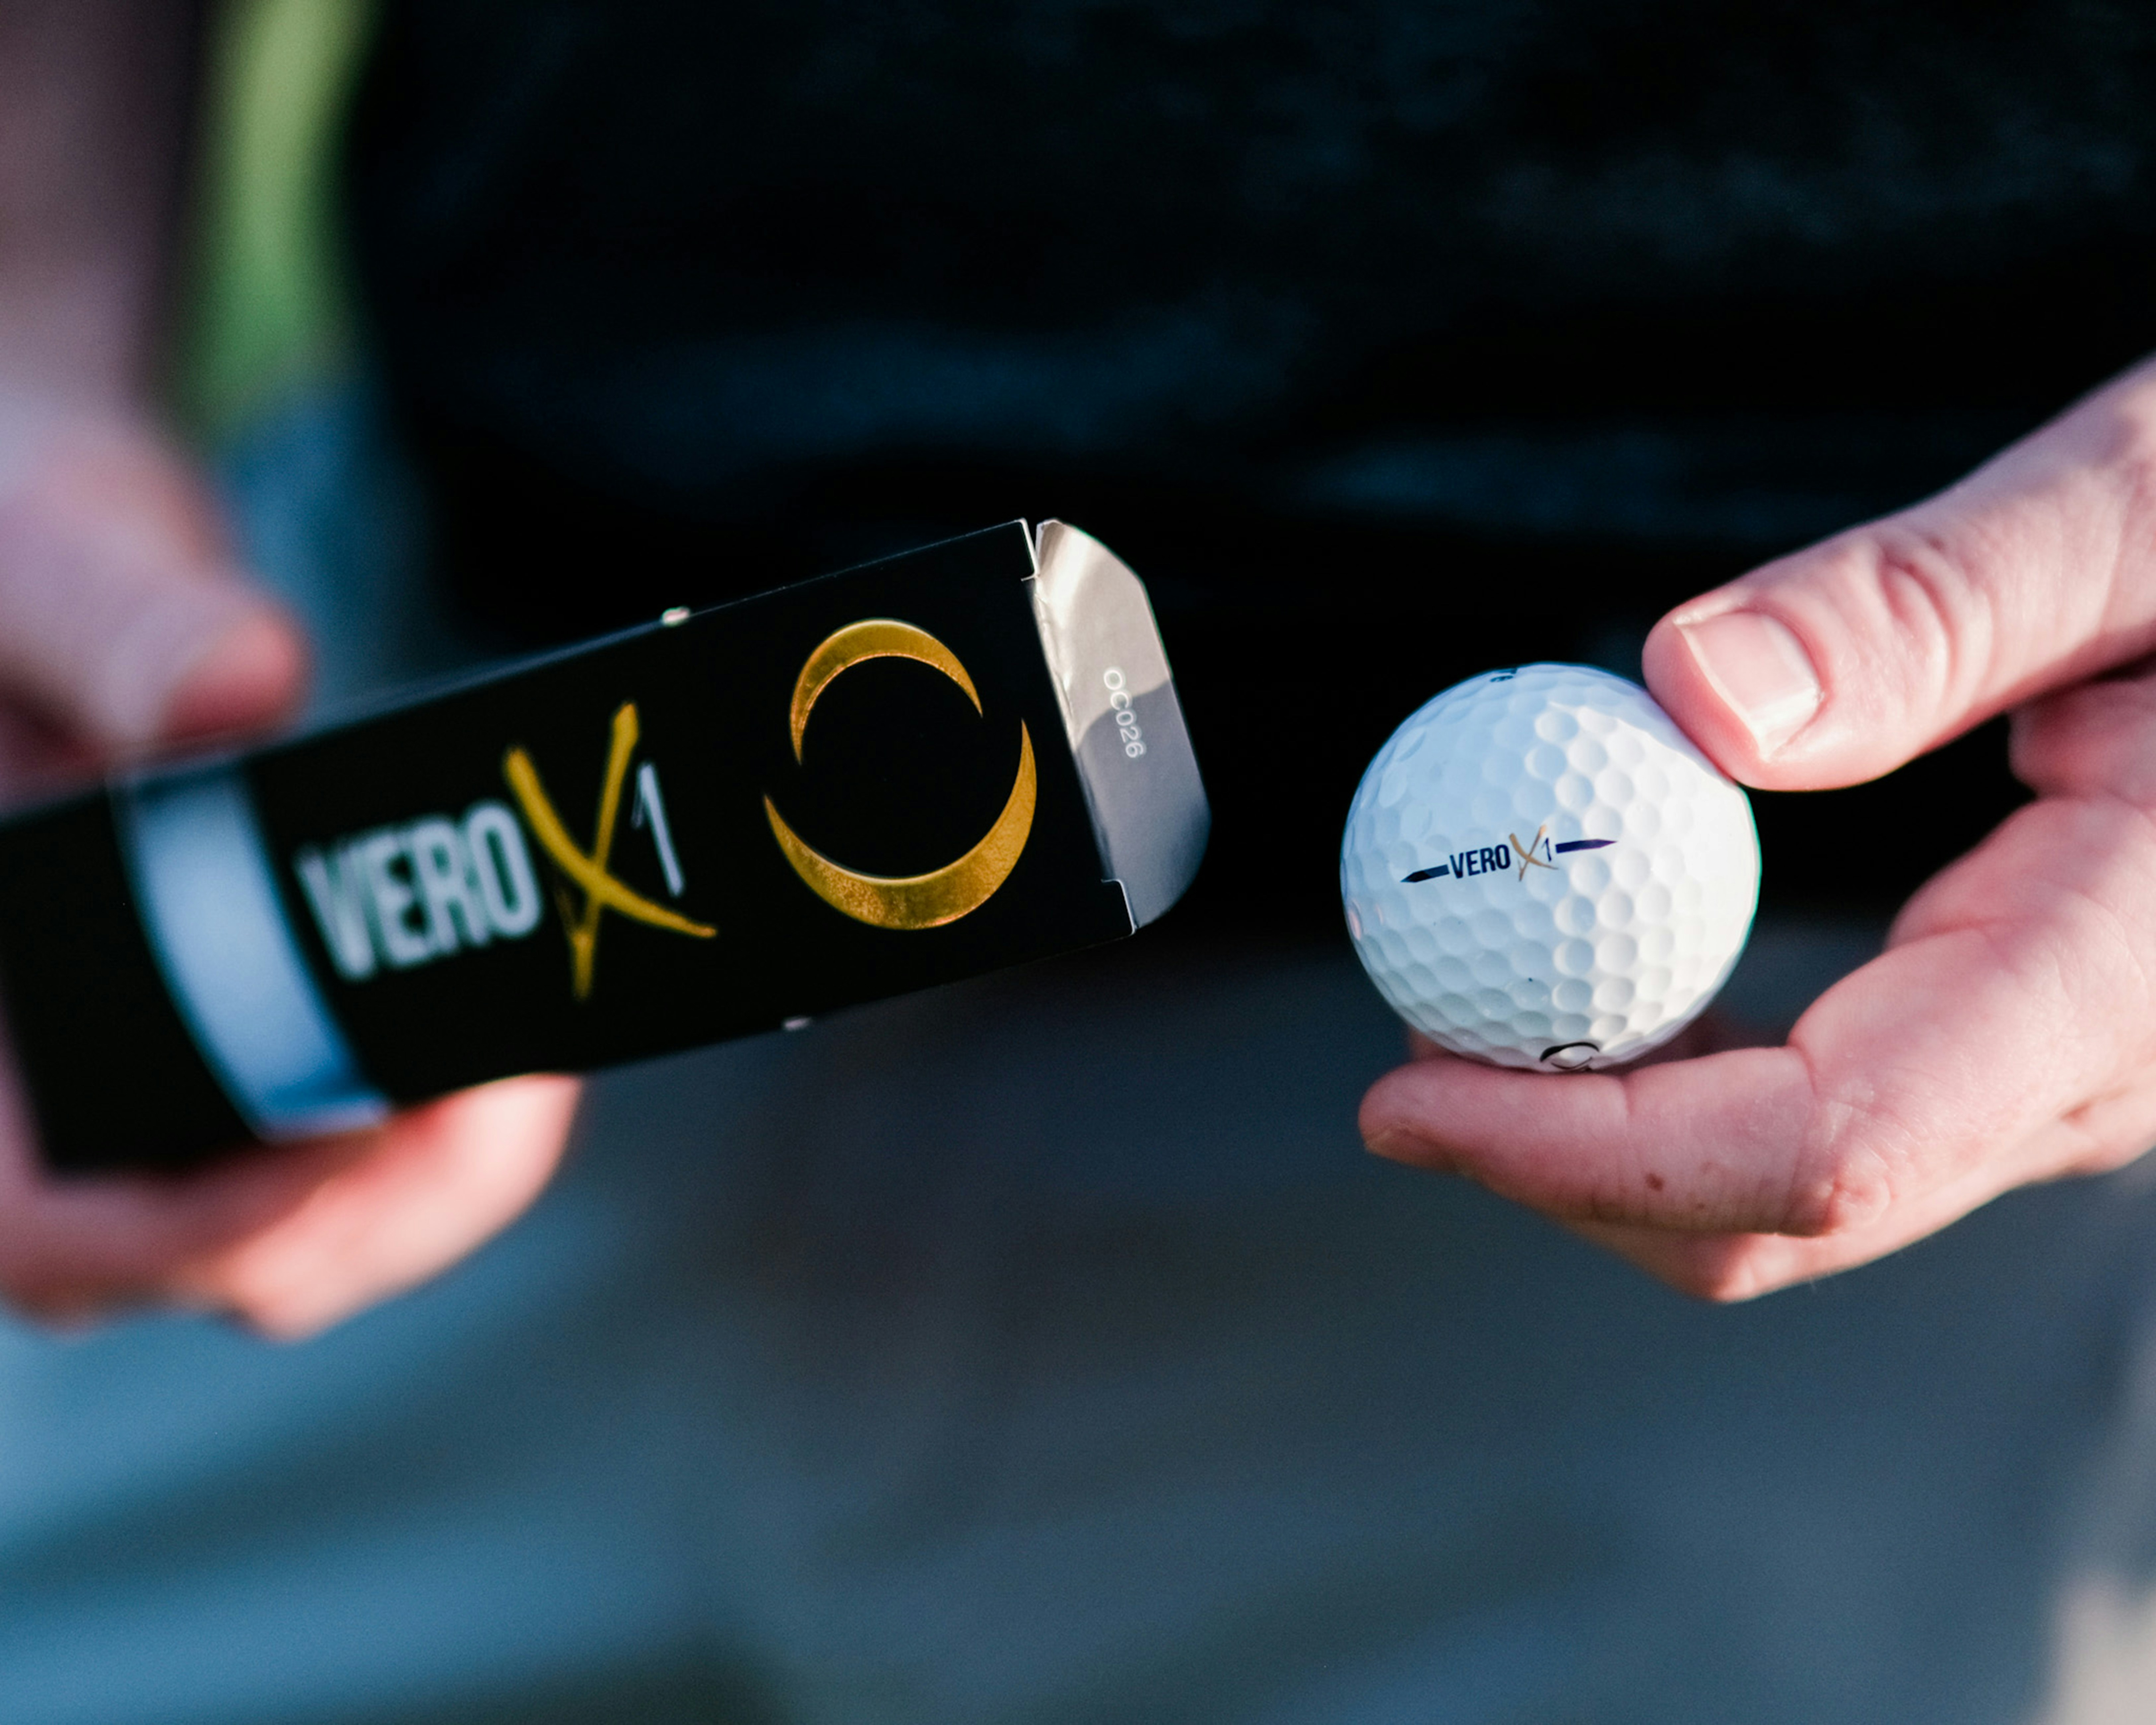 Play the best ball in the game - www.oncoregolf.com